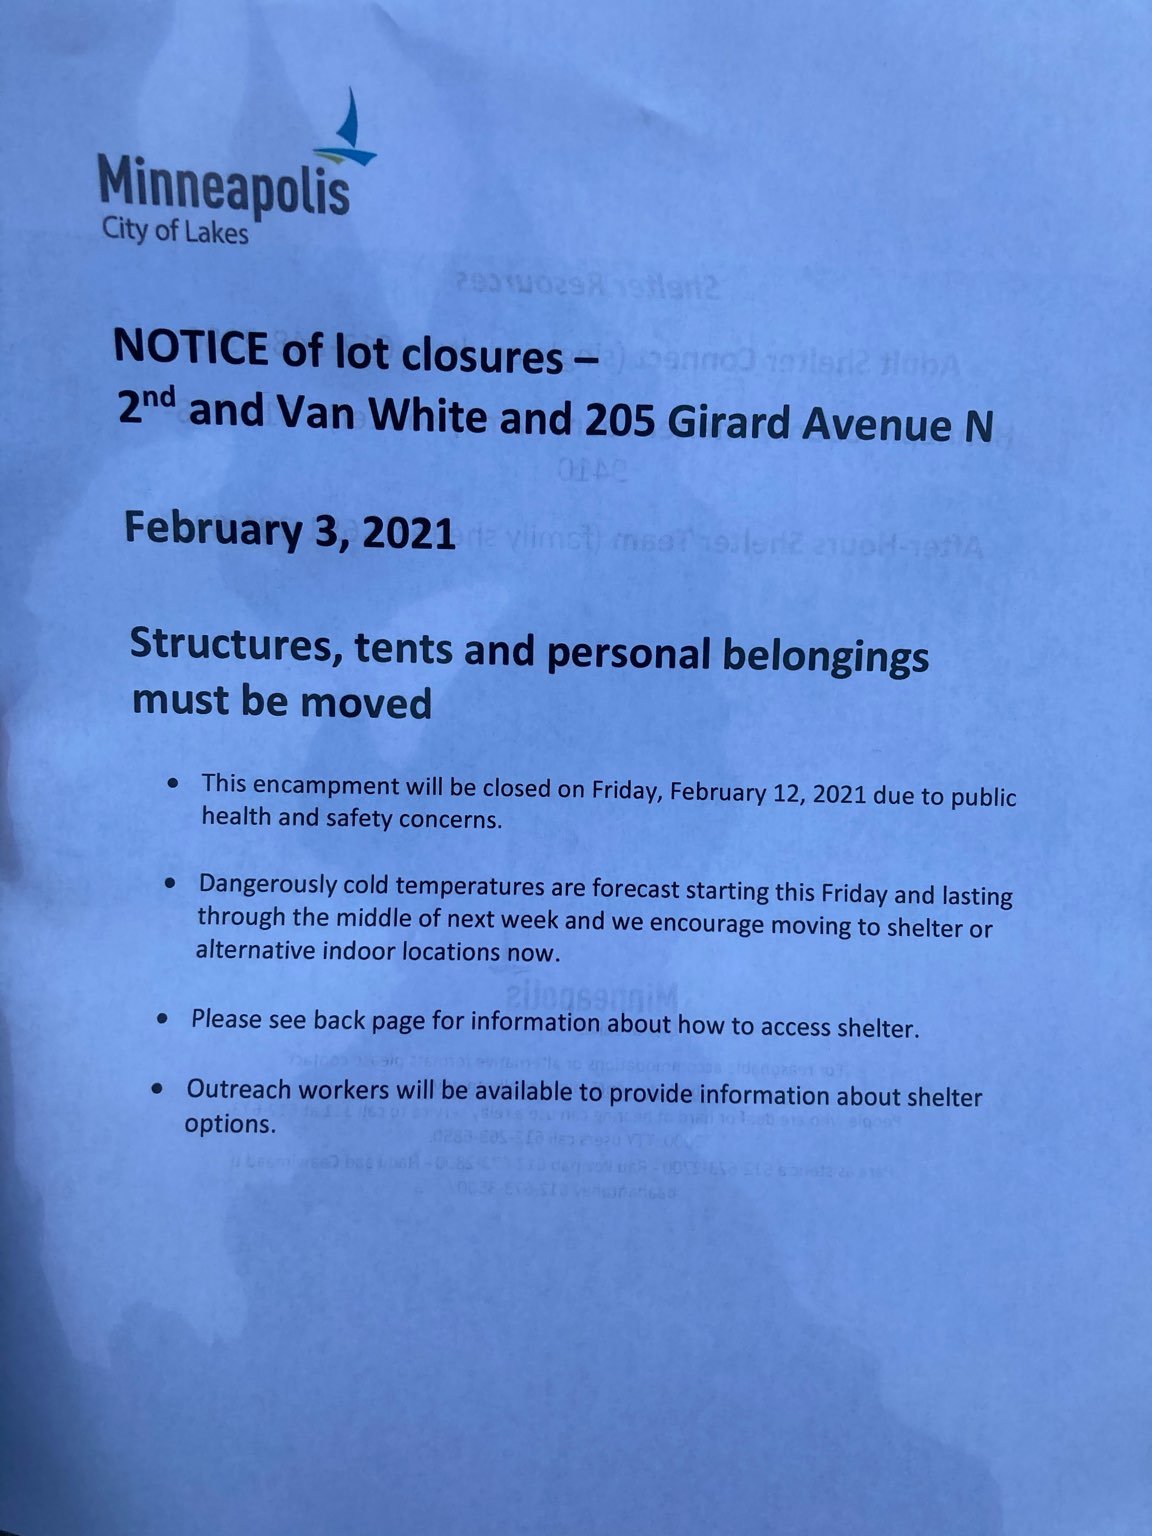 NOTICE of lot closures – 2nd and Van White and 205 Girard Avenue N.  February 3, 2021.  Structures, tents, and personal belongings must be moved.  This encampment will be closed on Friday, February 12, 2021 due to public health and safety concerns.  Dangerously cold temperatures are forecast starting this Friday and lasting through the  middle of next week and we encourage moving to shelter or alternative indoor locations now.